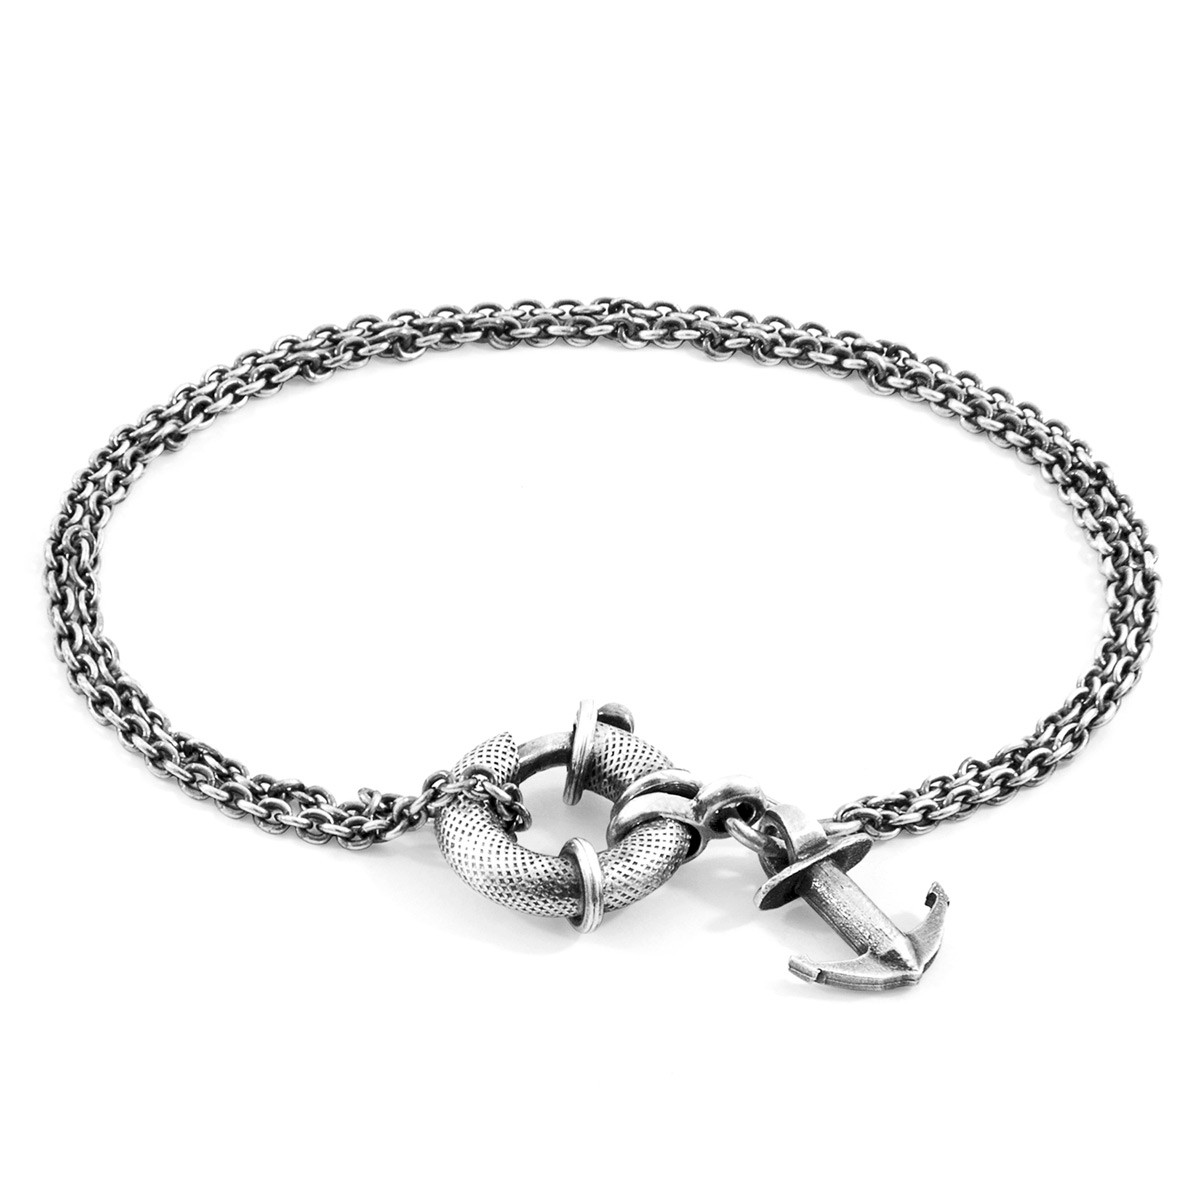 Clyde I Anchor Silver Chain Bracelet